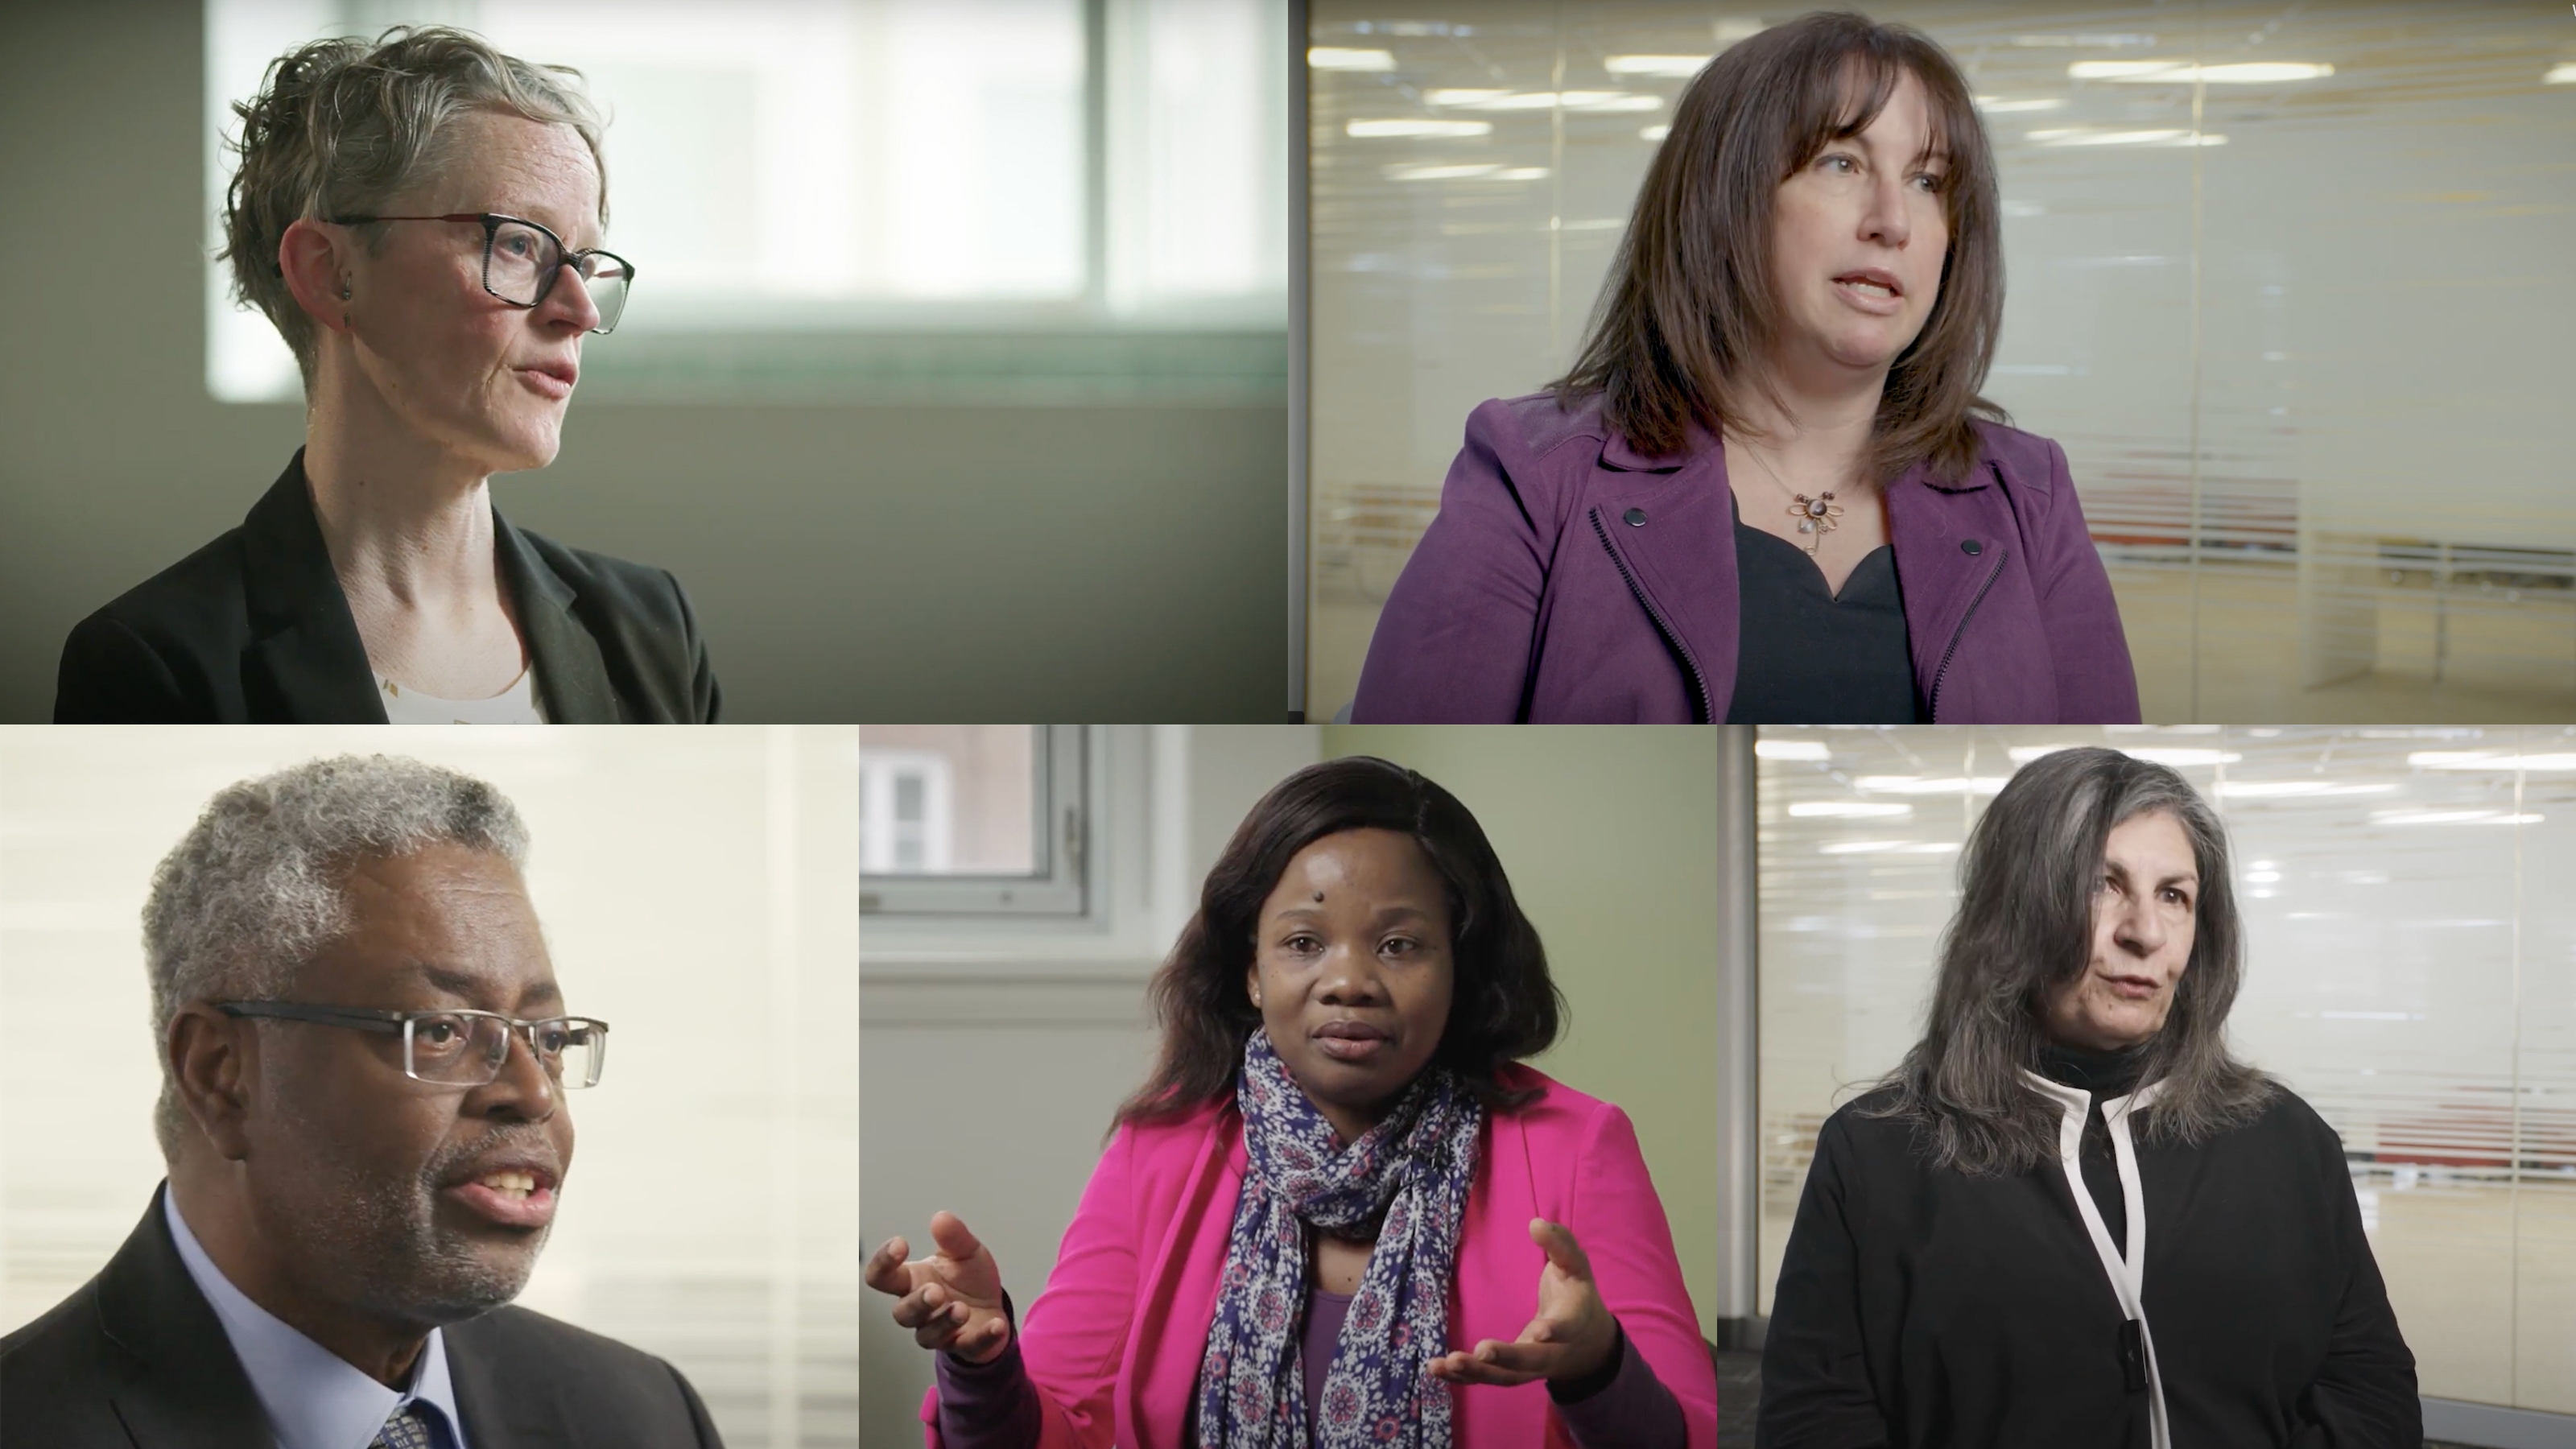 From top-left to bottom-right: Still of Carrie Smith in “What Is Equity in Research?”; still from of Yasmeen Abu-Laban in “How to Create an Inclusive Research Environment”; still of Andy Knight in “Racialization in Research”; still of Elizabeth Onyango in “Ableism in Research” ; still of Evelyn Hamdon in “EDI Training for Research”.